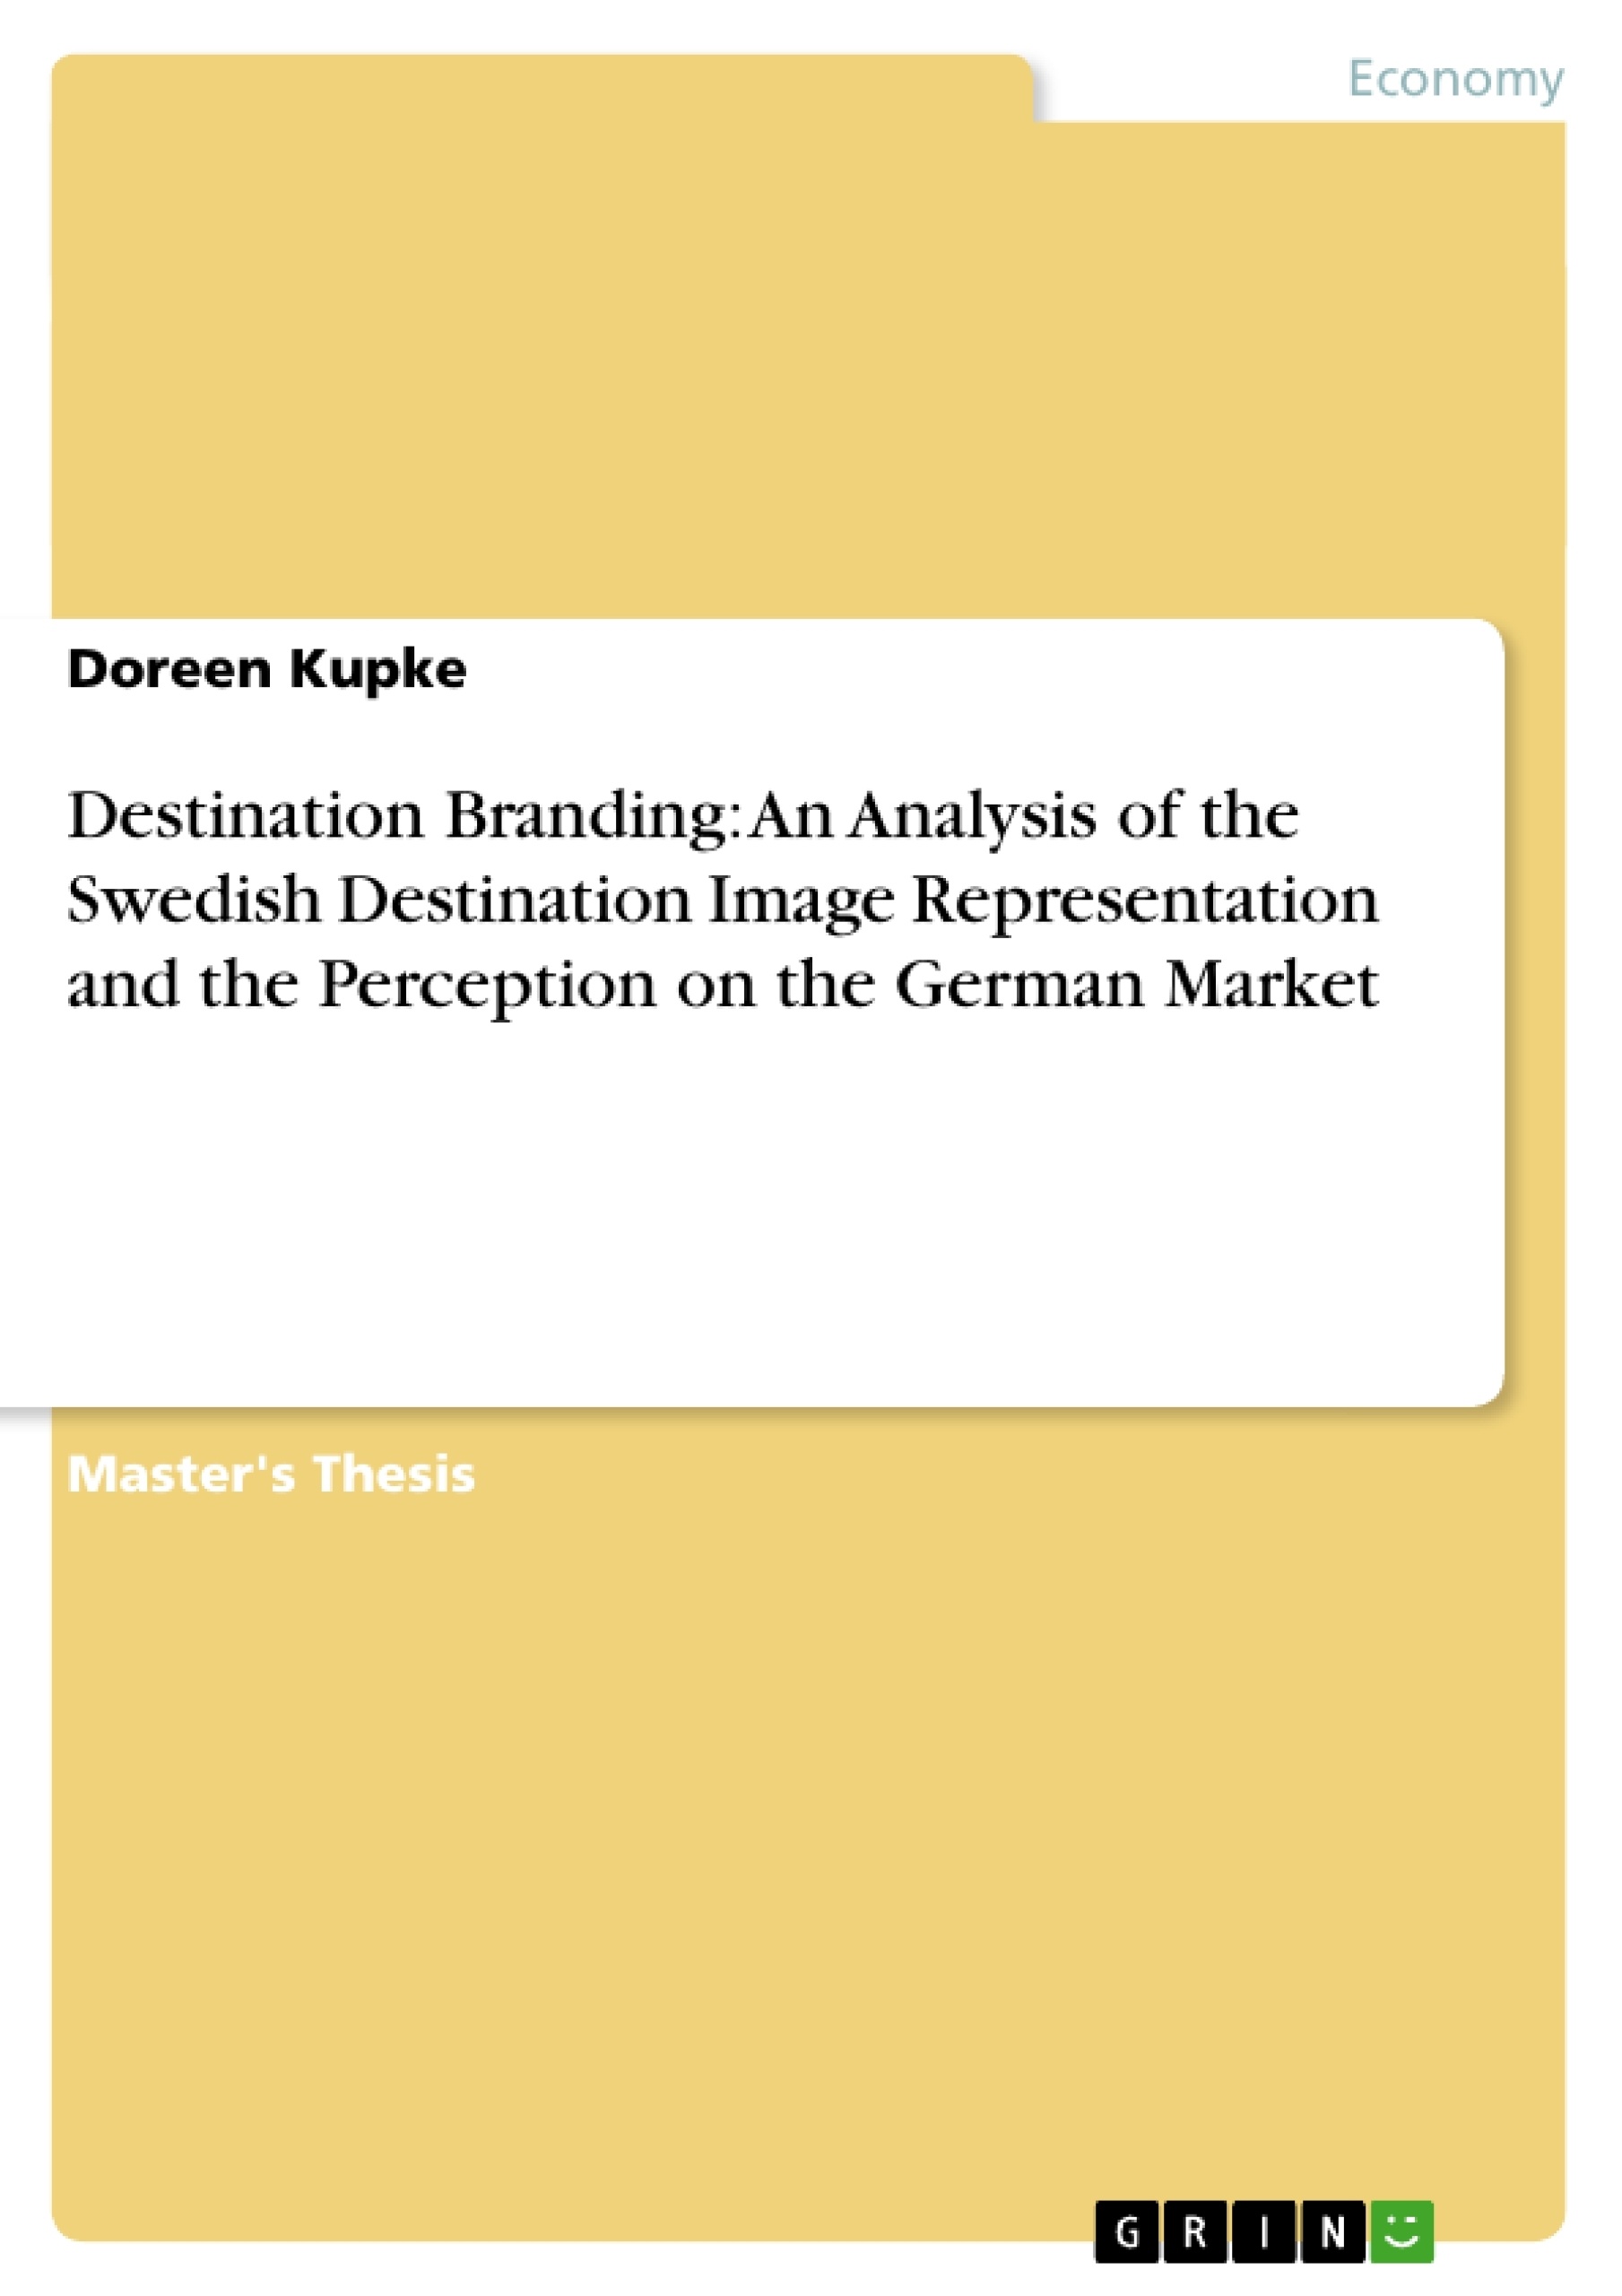 Title: Destination Branding: An Analysis of the Swedish Destination Image Representation and the Perception on the German Market